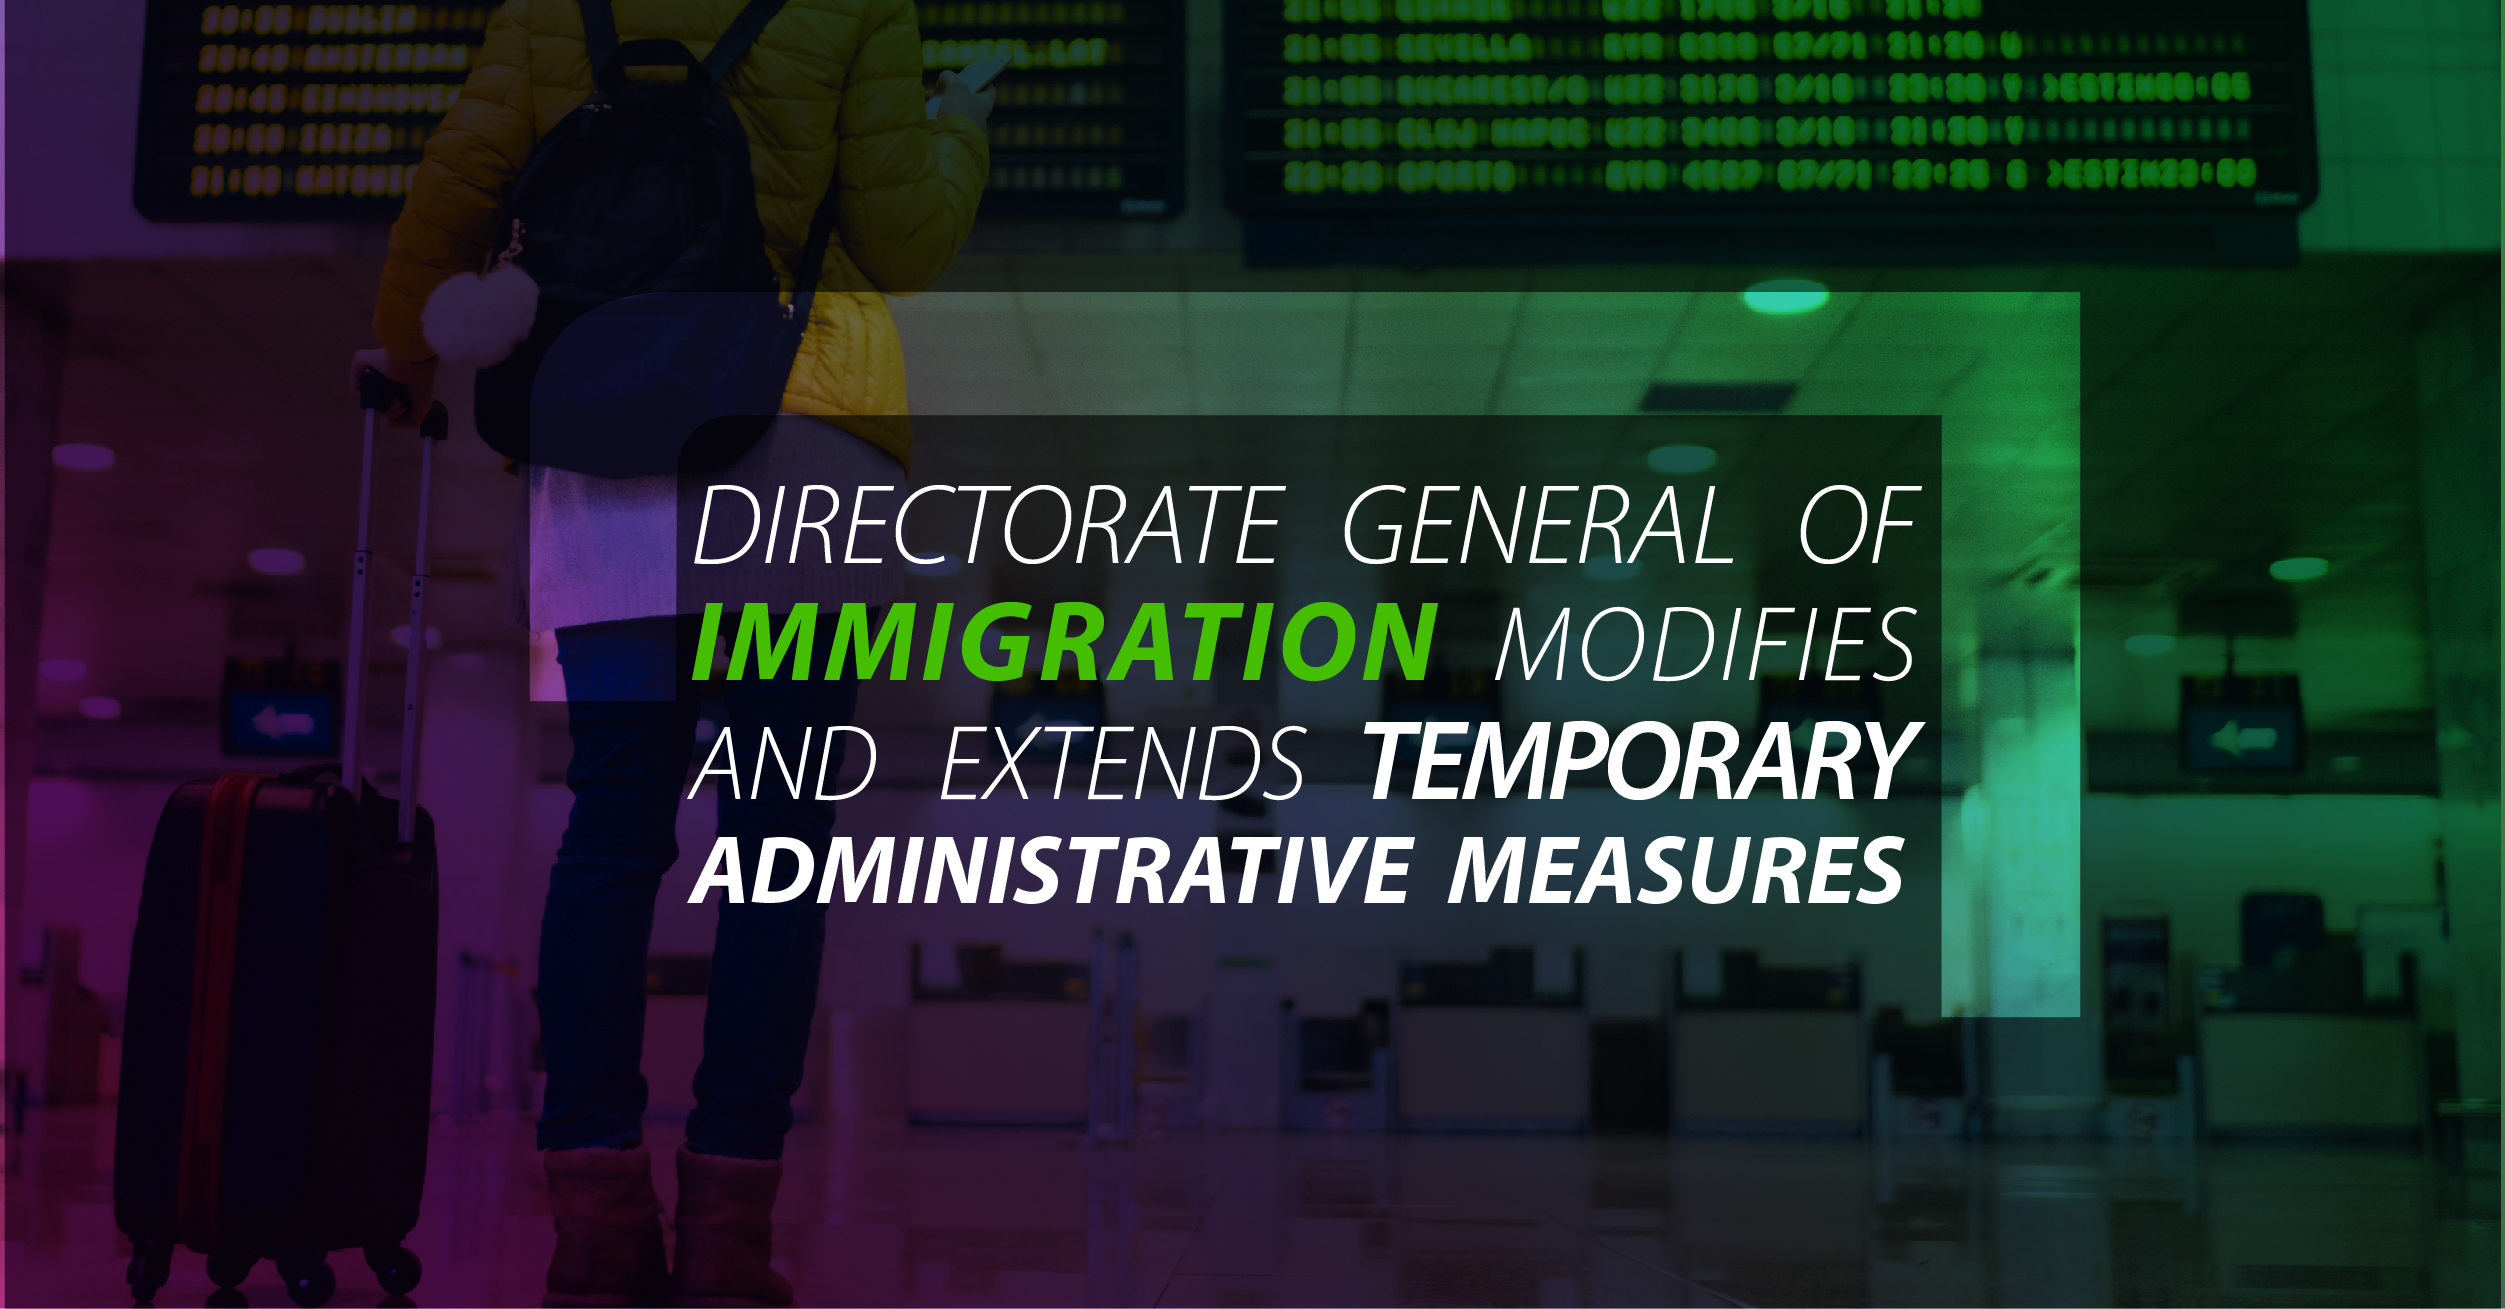 Directorate General of Immigration modifies and extends temporary administrative measures in Costa Rica